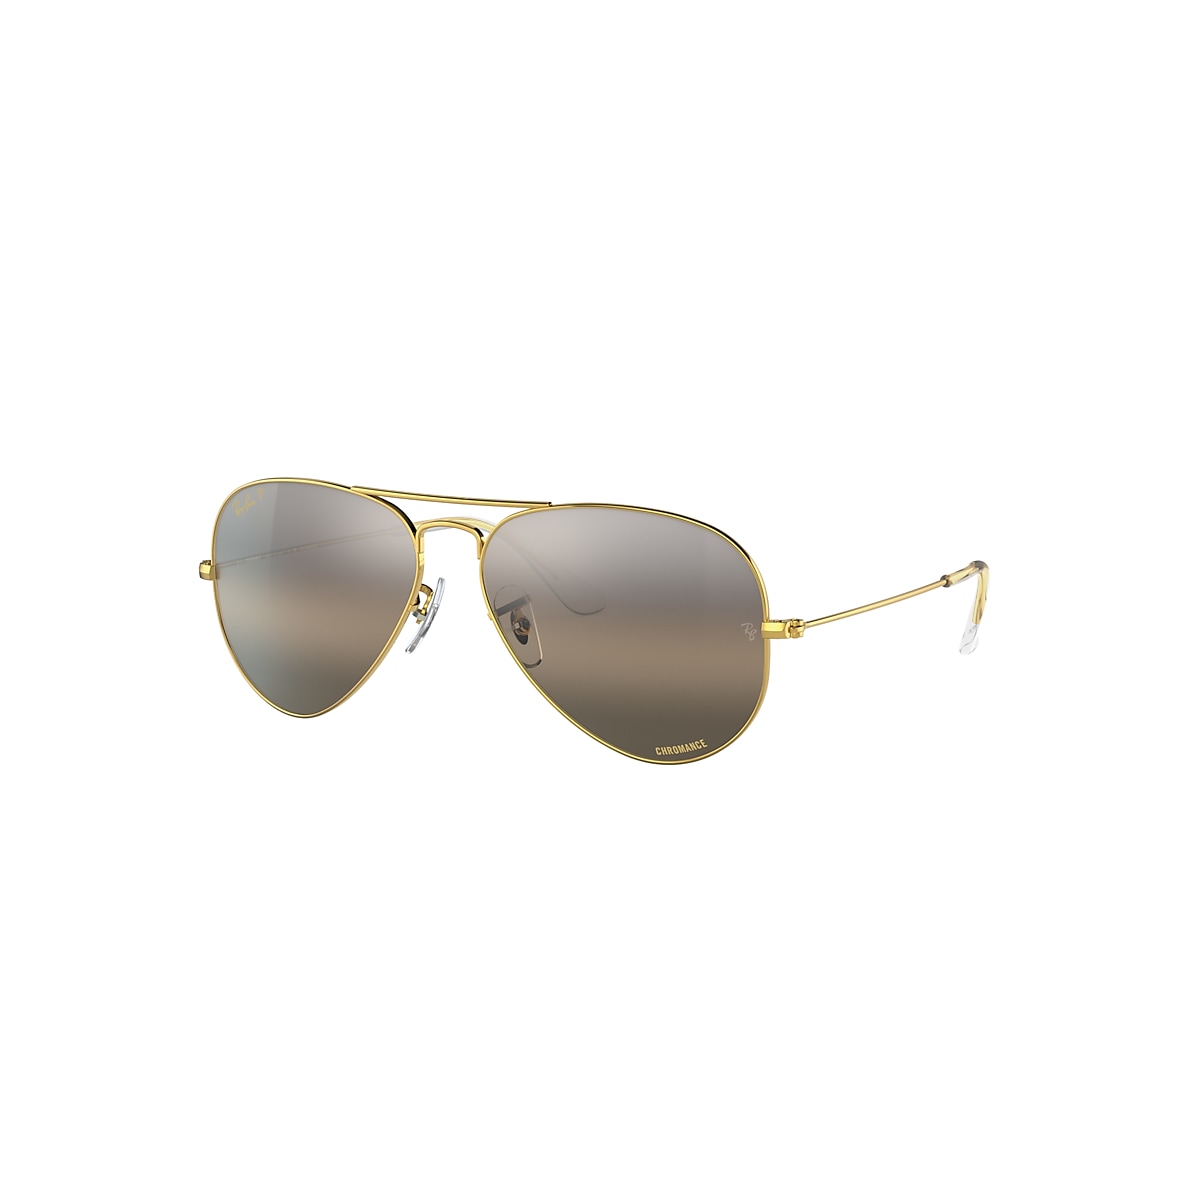 AVIATOR CHROMANCE Sunglasses in Gold and Grey - Ray-Ban